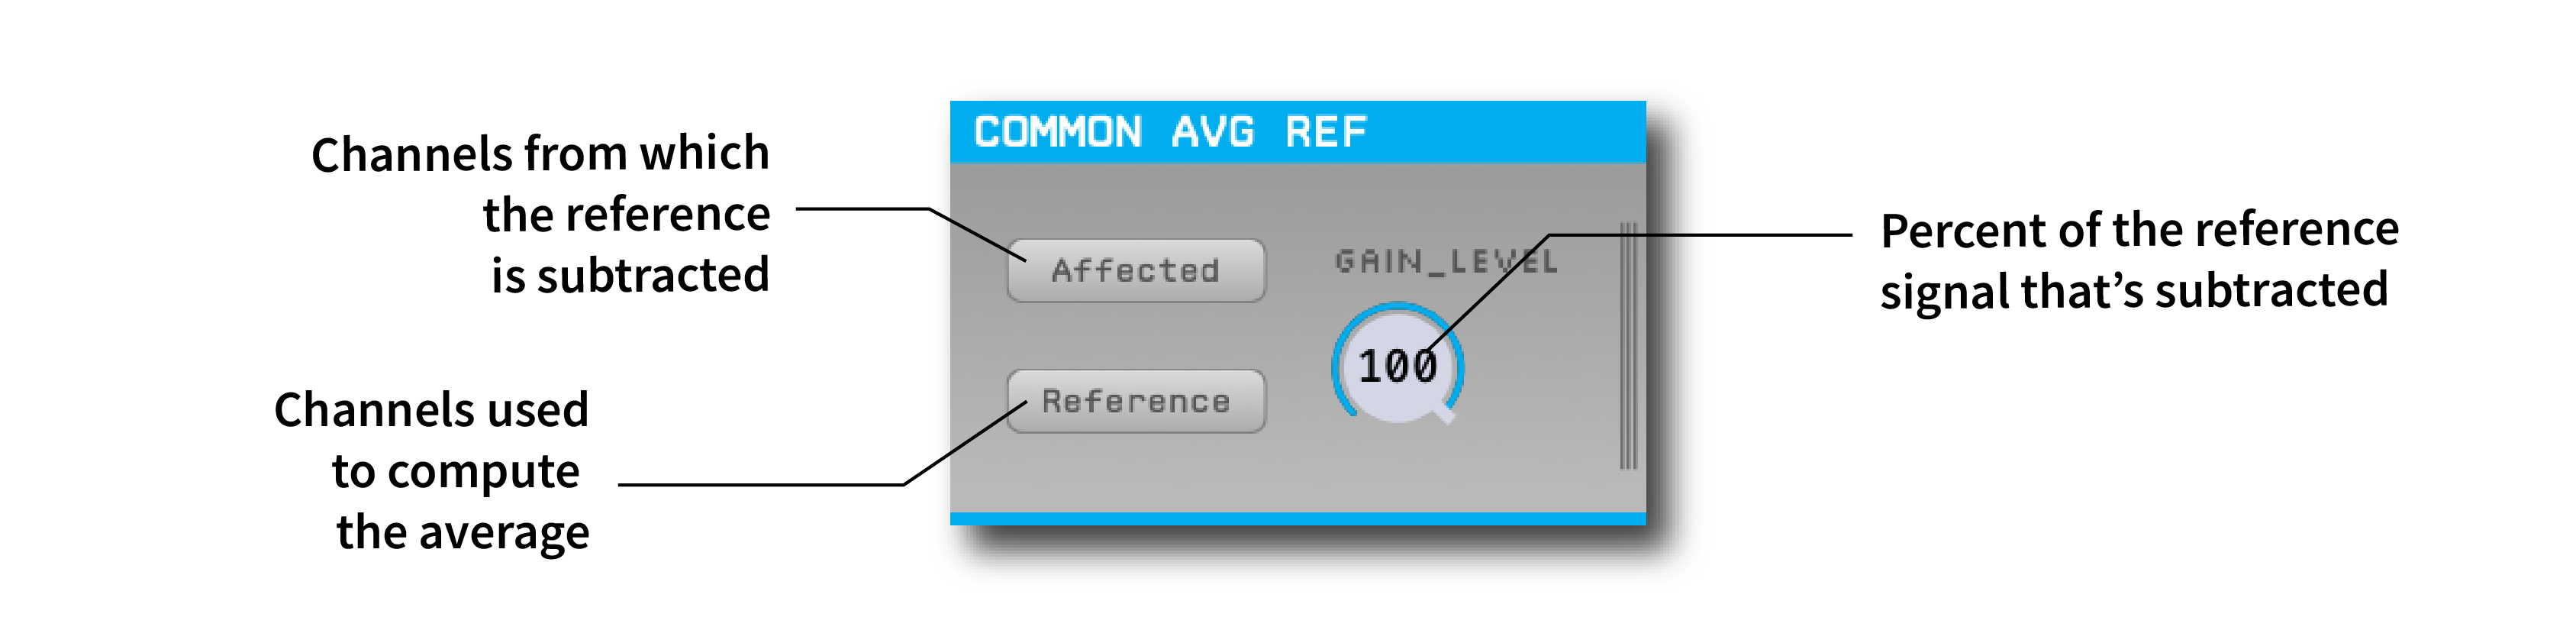 Annotated Common Average Reference settings interface